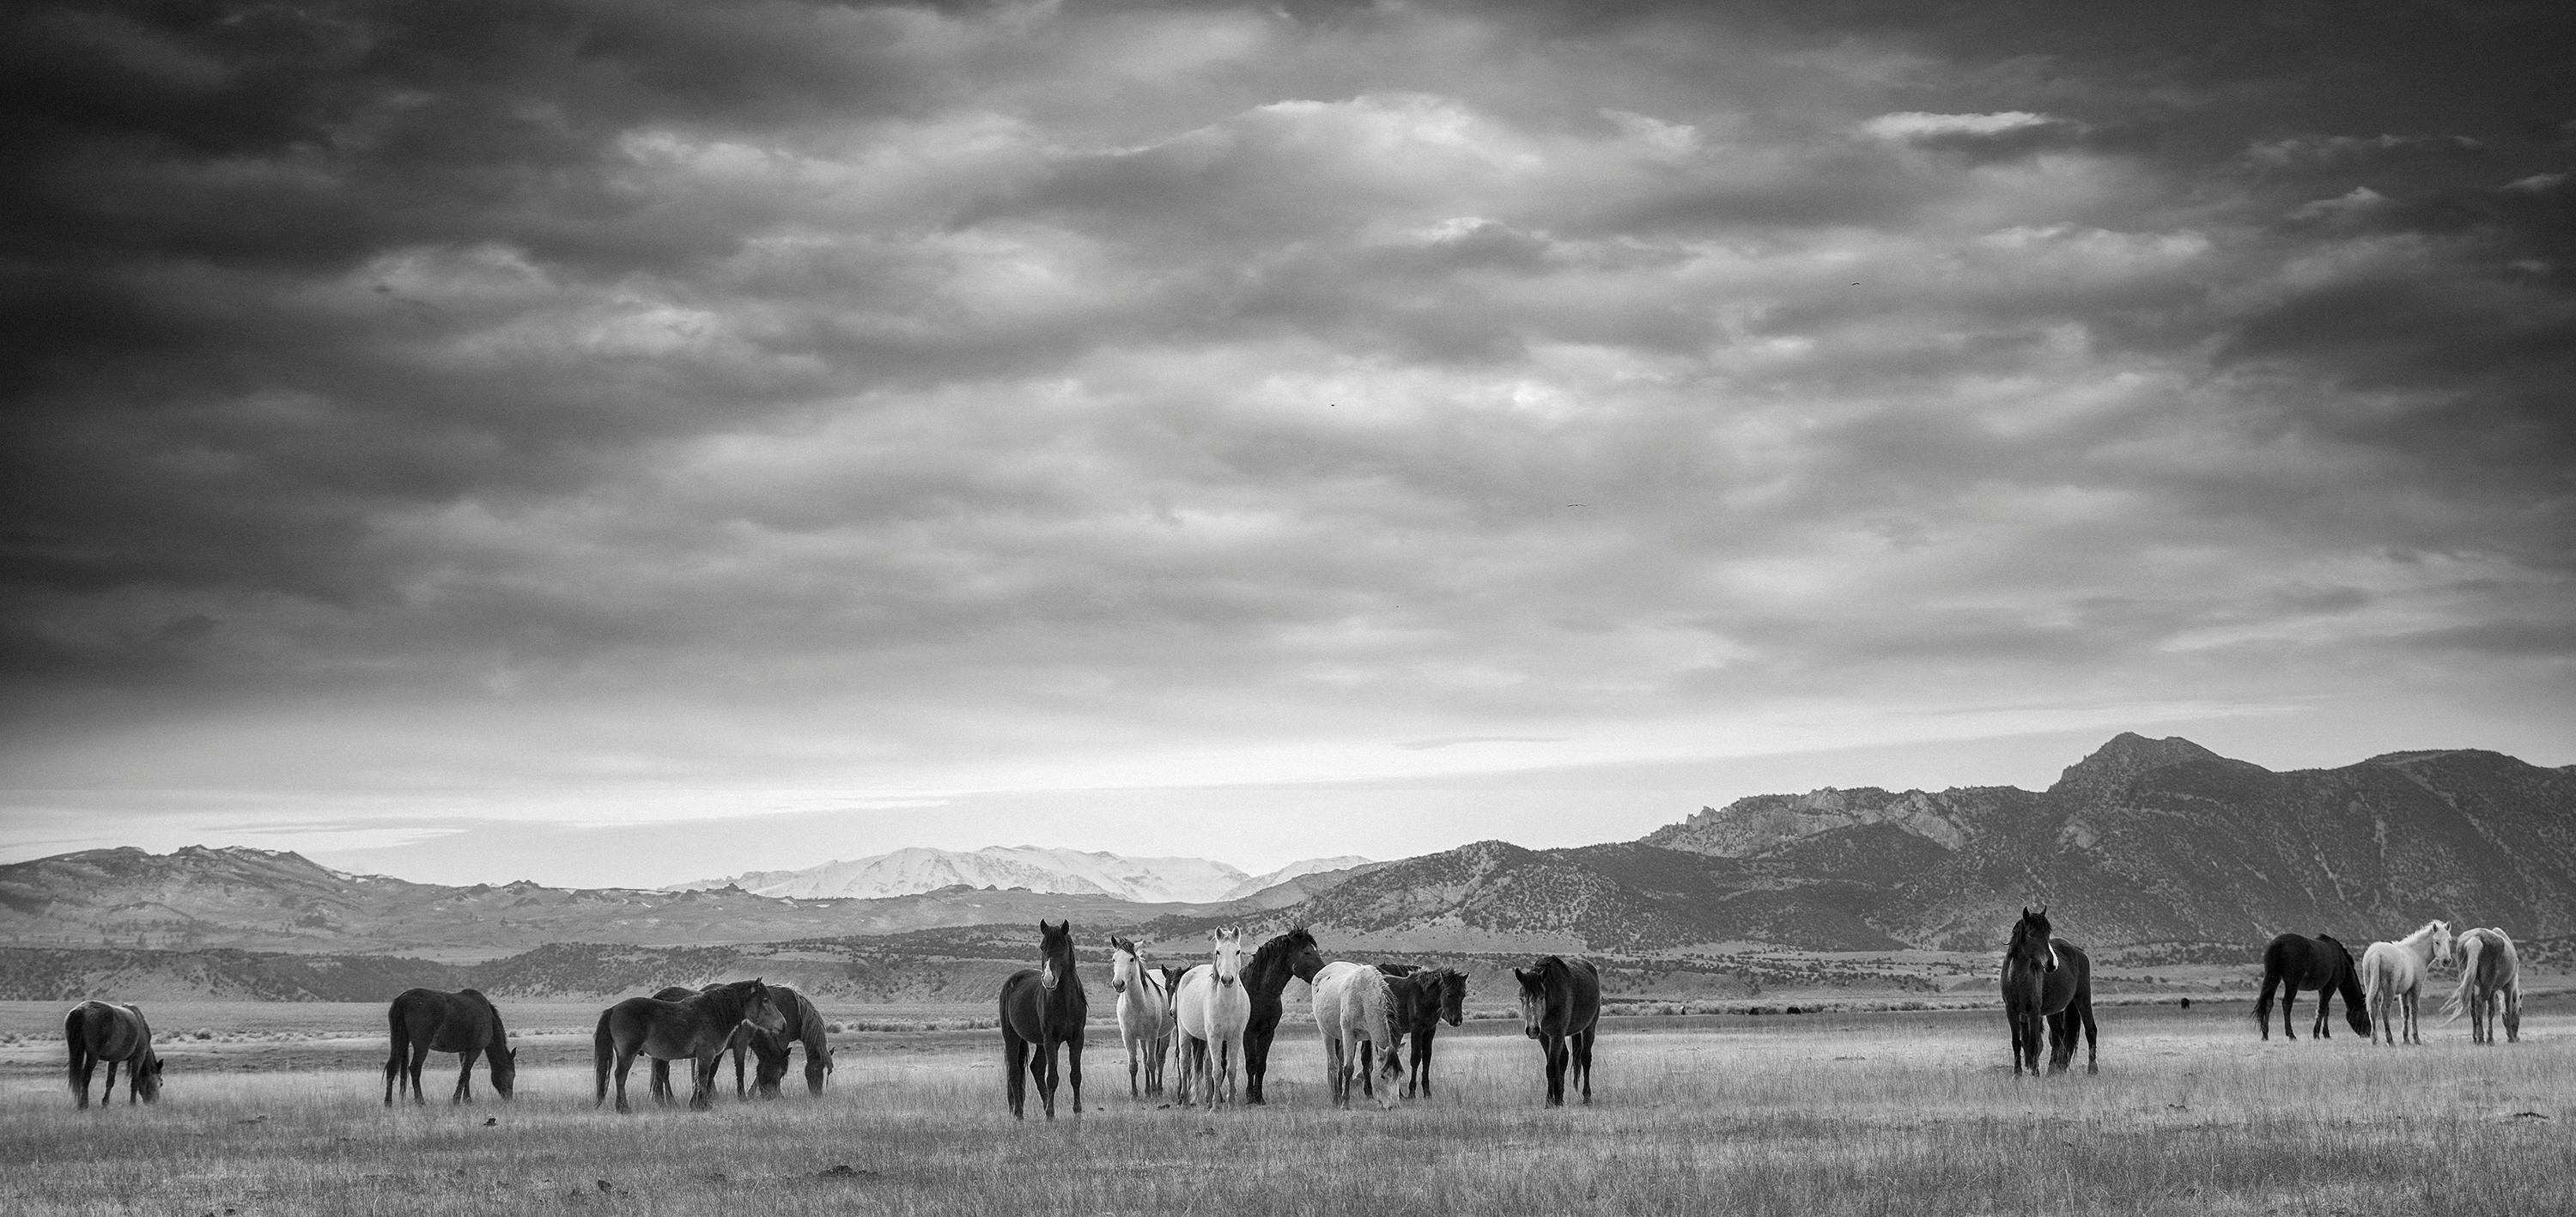 Shane Russeck Black and White Photograph - Black and White Wild Horse Photography, Mustangs "Gangs All Here" 90x40 , Signed